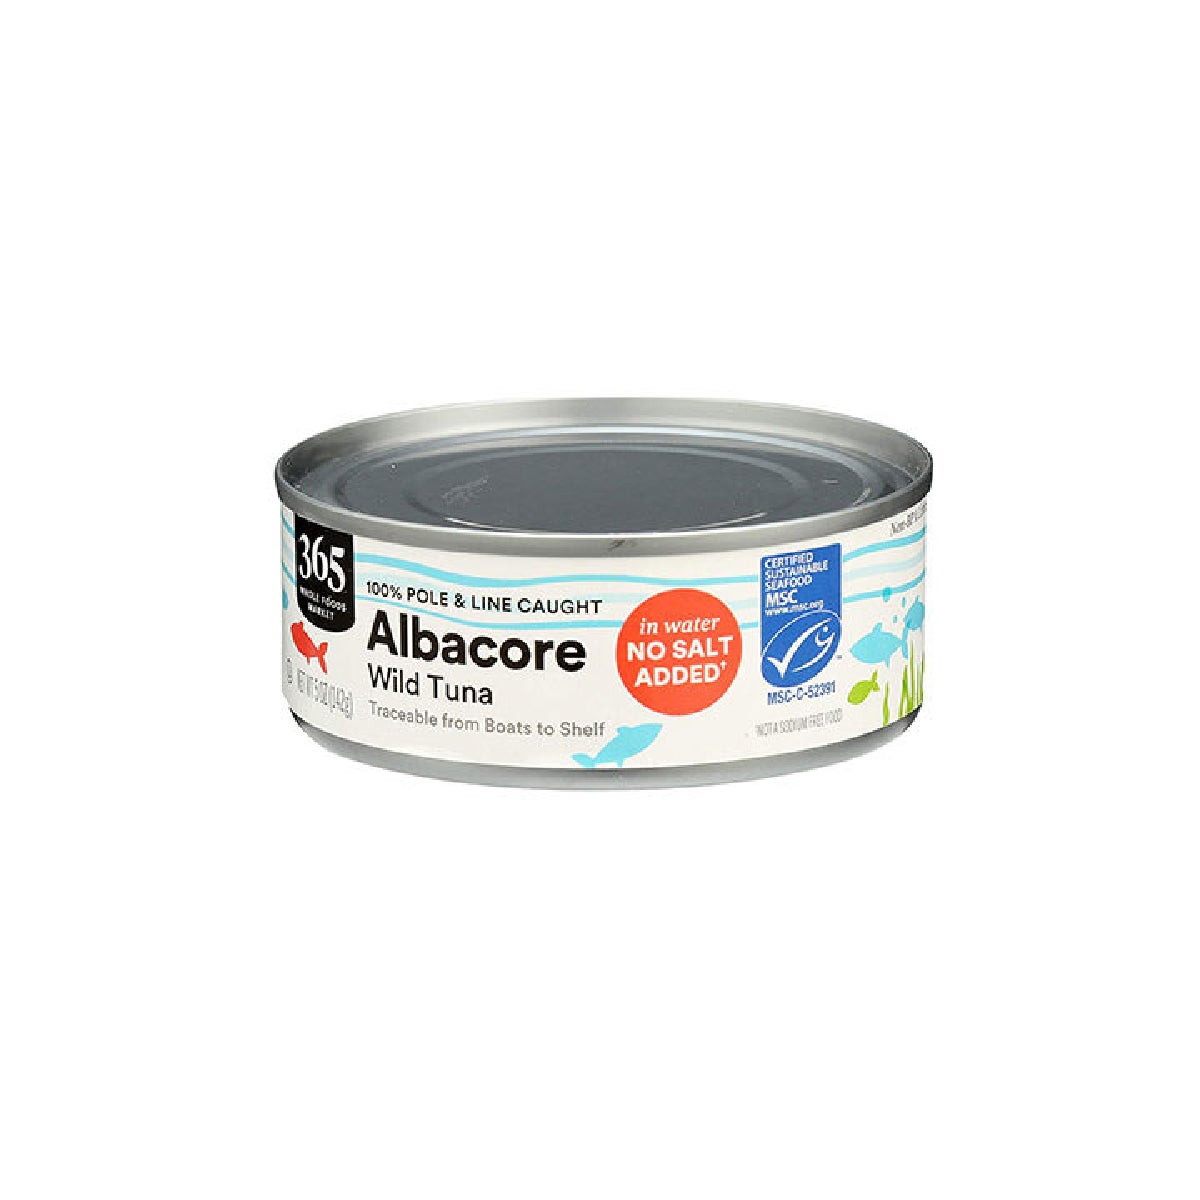 Best Canned Tuna Option_365 by Whole Foods Market Albacore in Water, No Salt Added